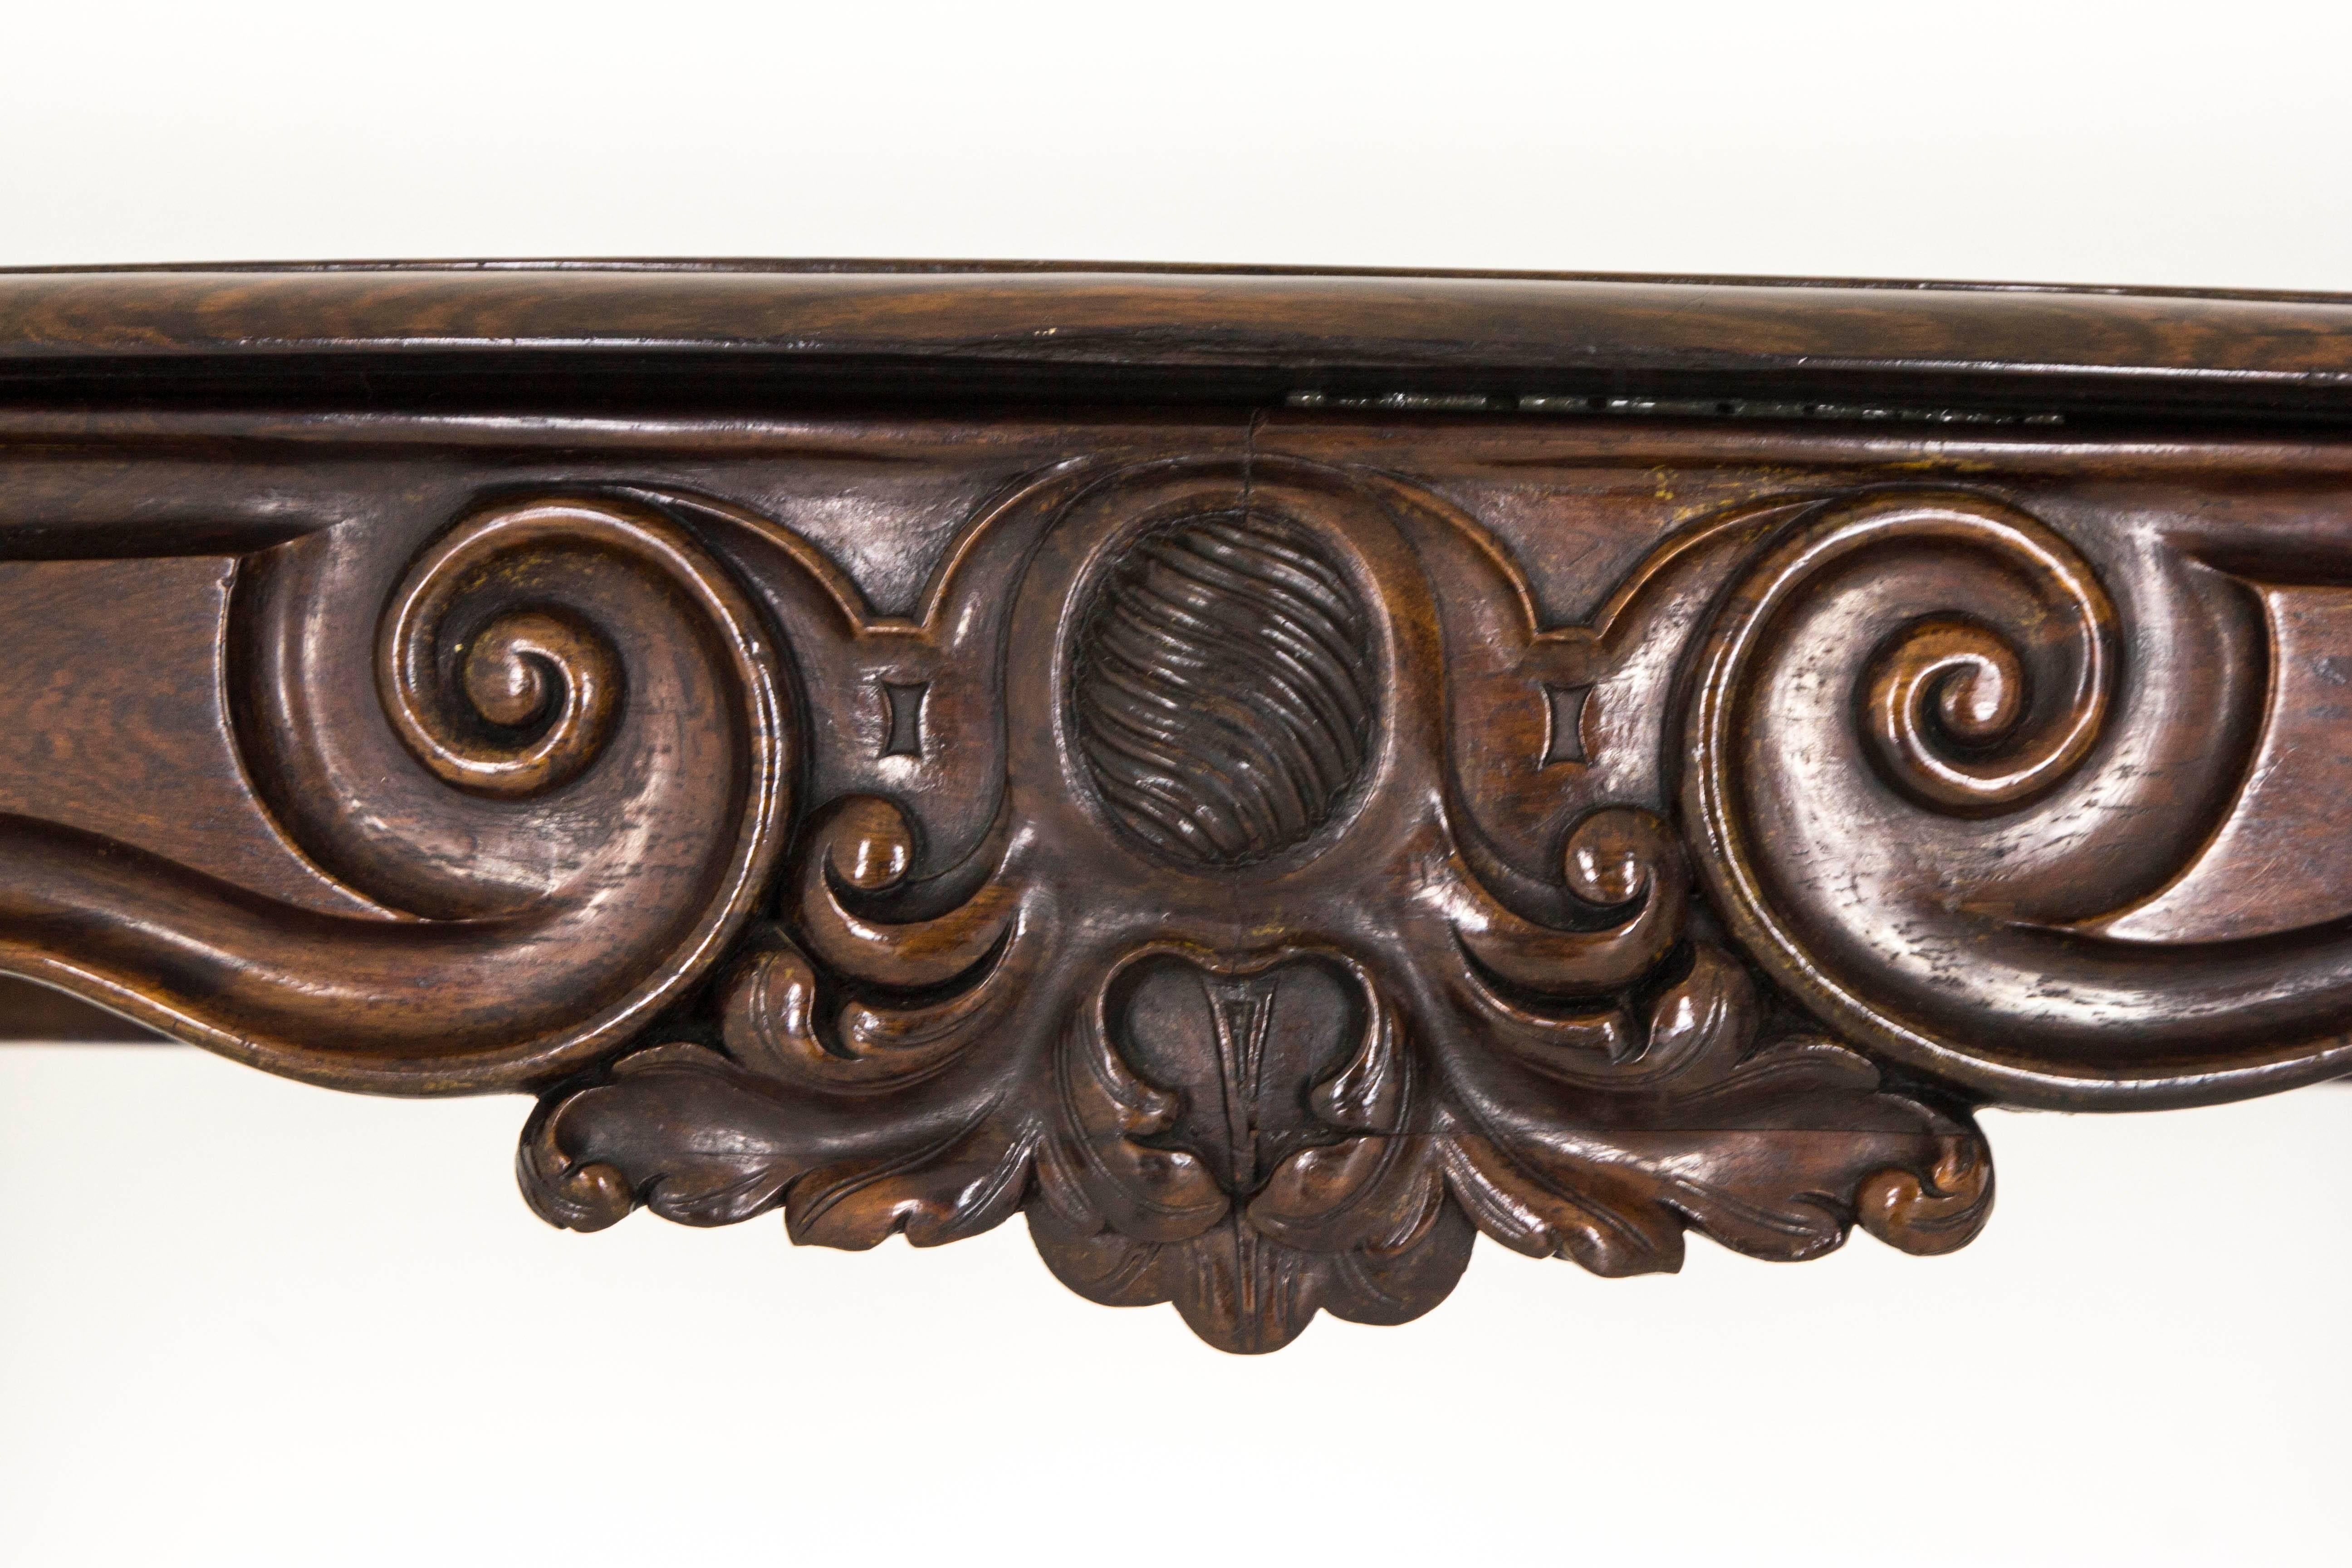 Antique Console Table, Carved Walnut Table, France 1880, B777

Wall-mounted console antique table
France, 1880
Solid Walnut
Top has been replaced
Carved frieze
Elegant carved cabriole legs with carved cross stretcher below

Was $1250   now just